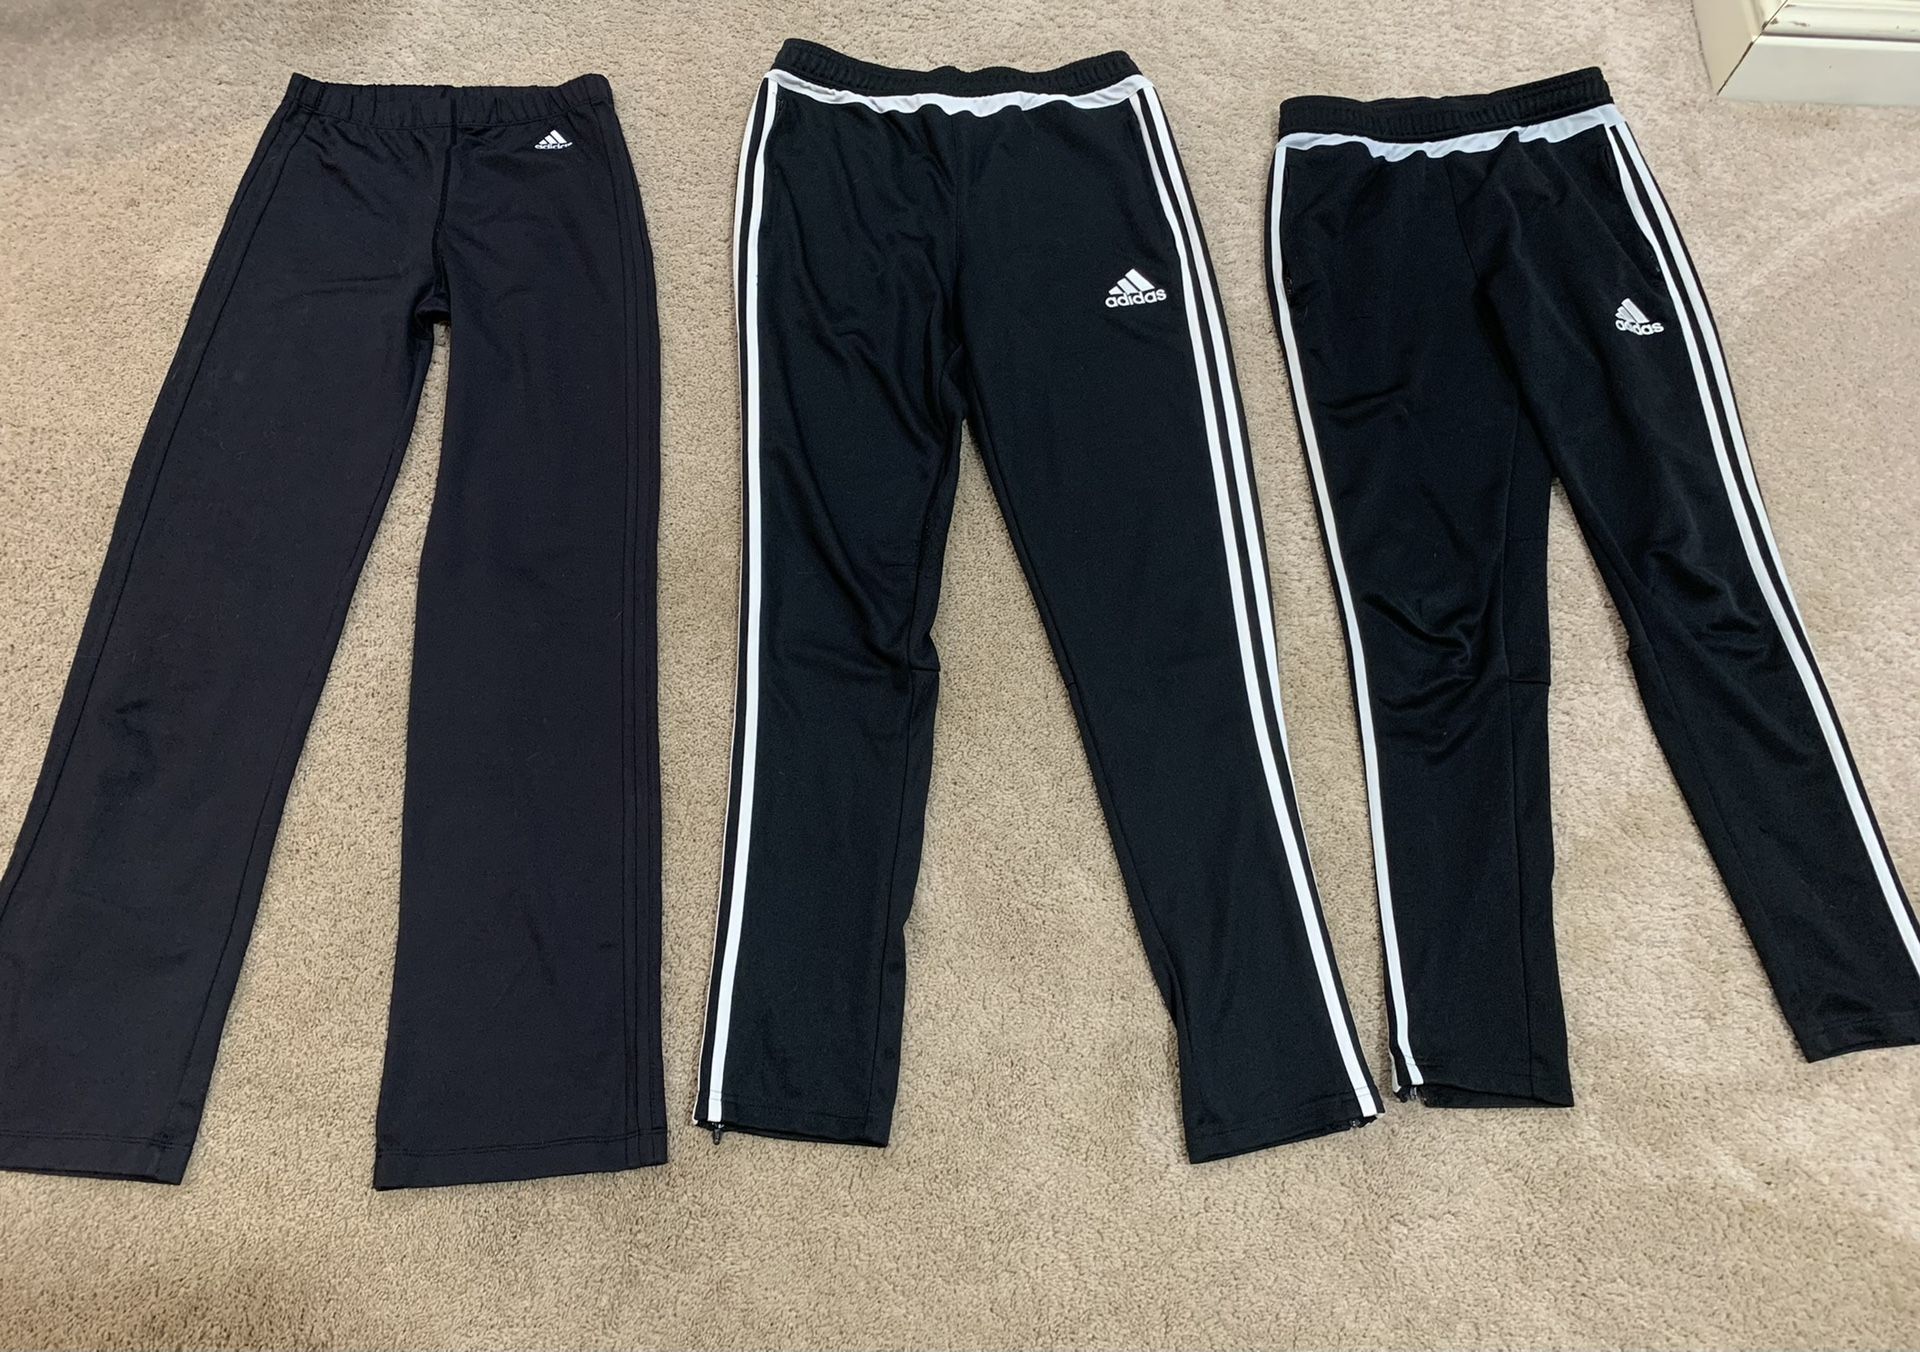 Multiple Pairs Of Adidas Pants Sizes Are From Left To Right Large Xl And Large